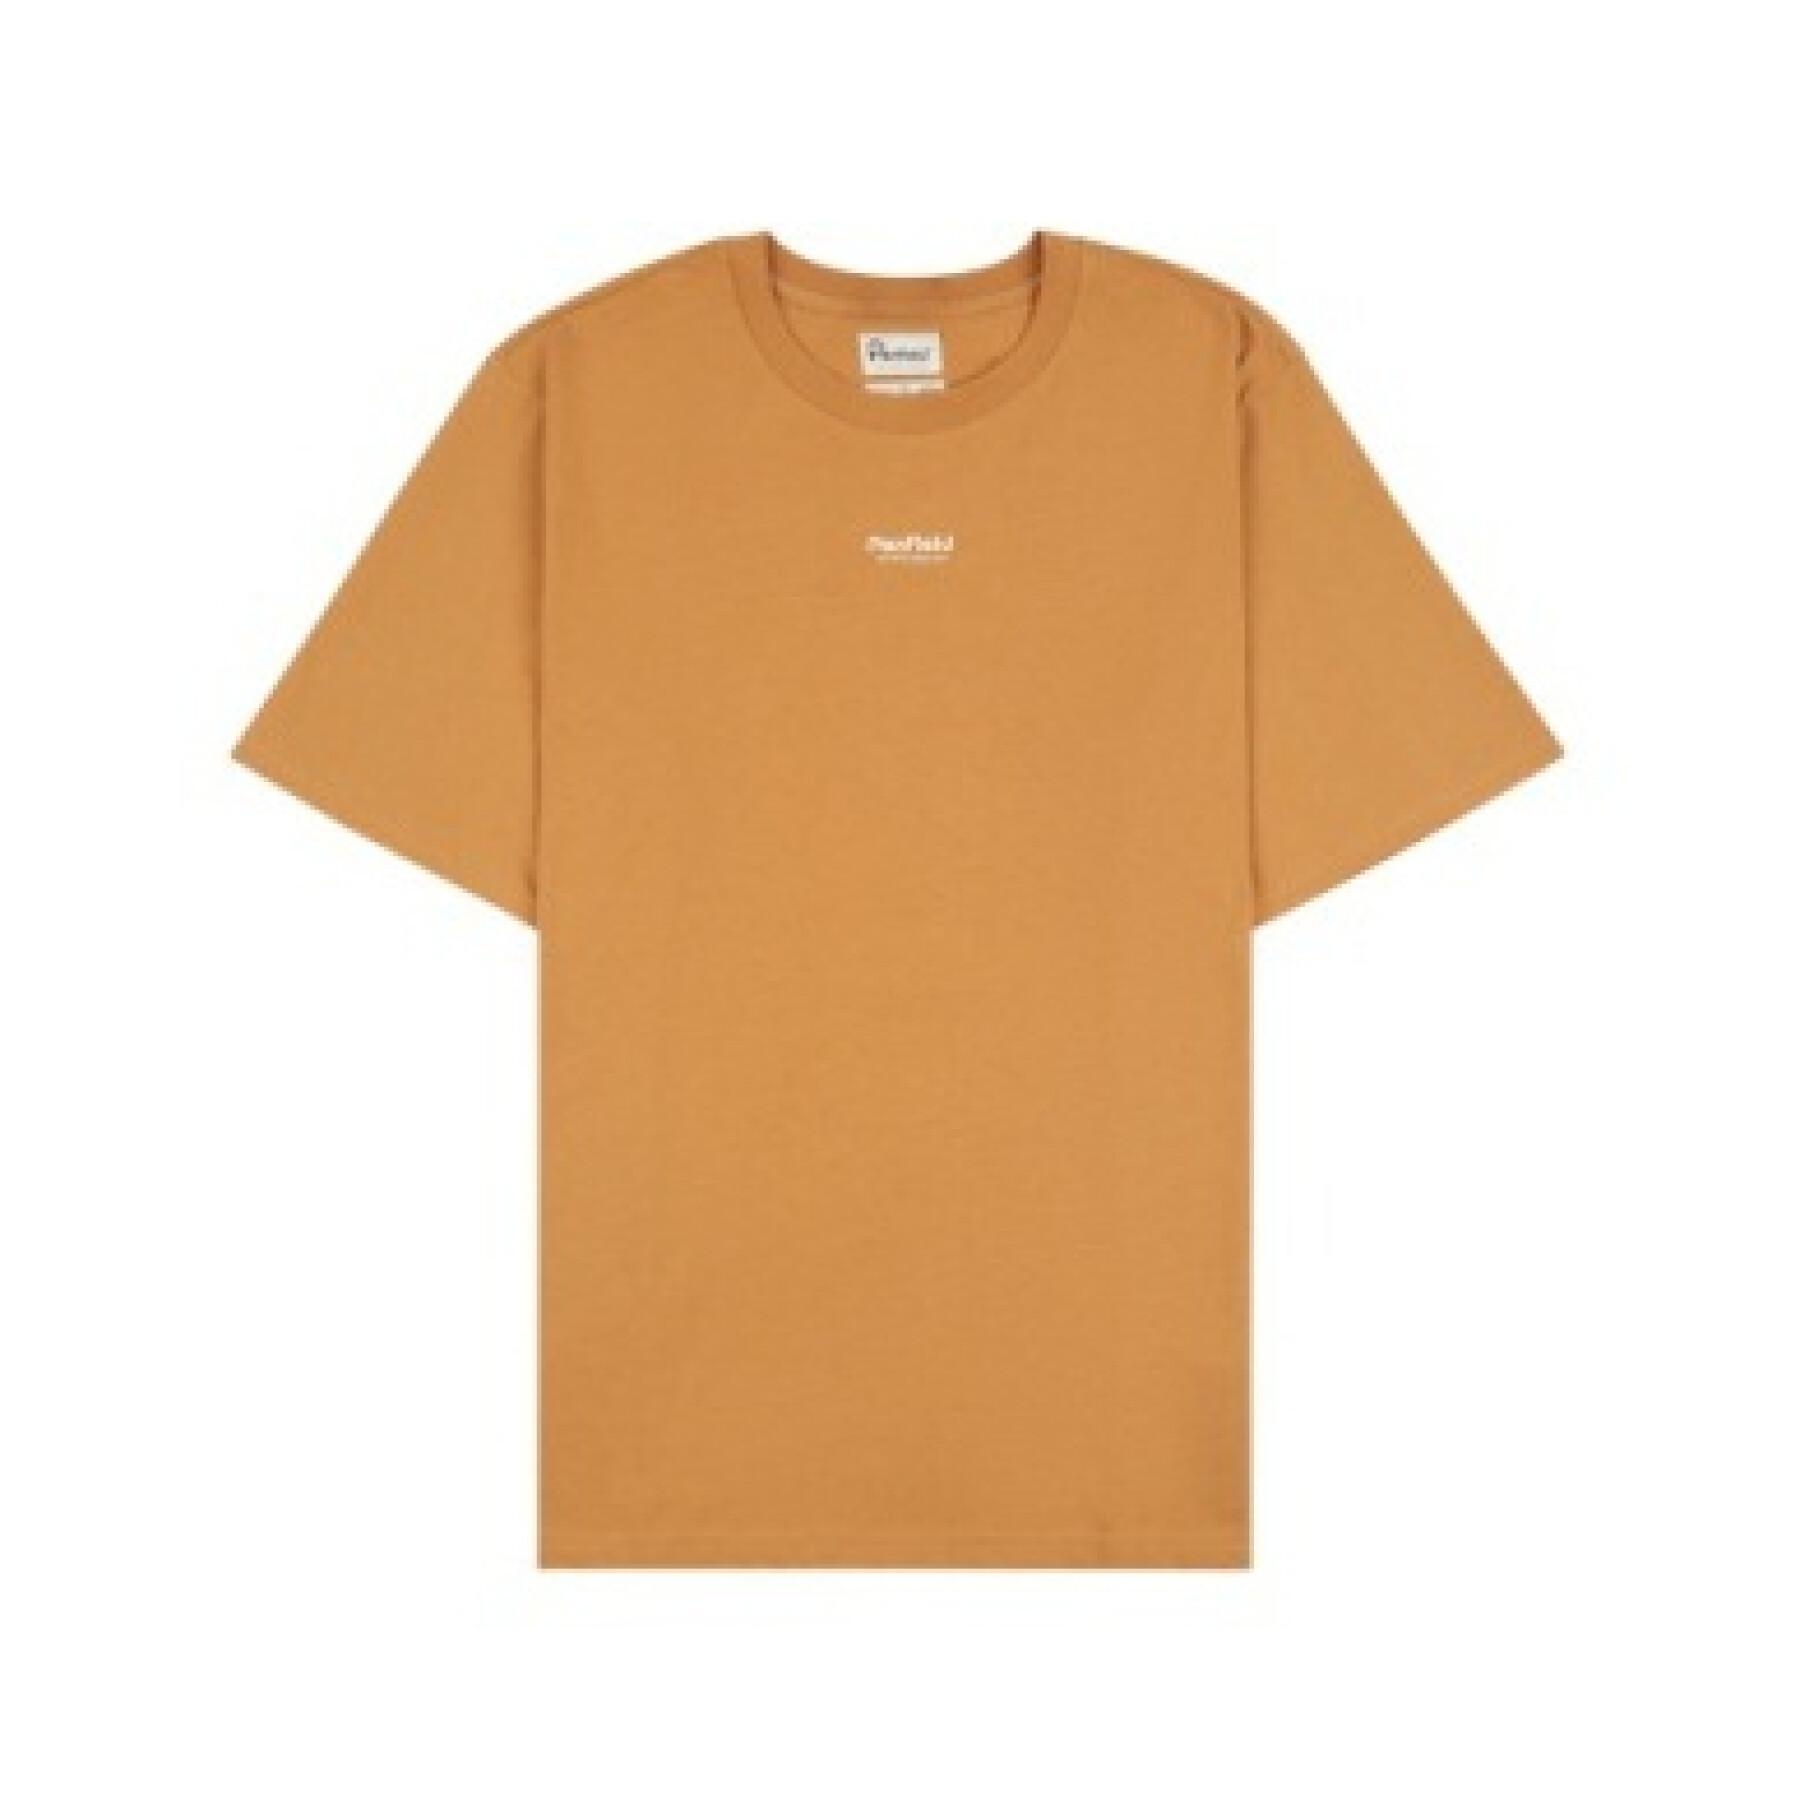 Women's oversized T-shirt Penfield montain graphic